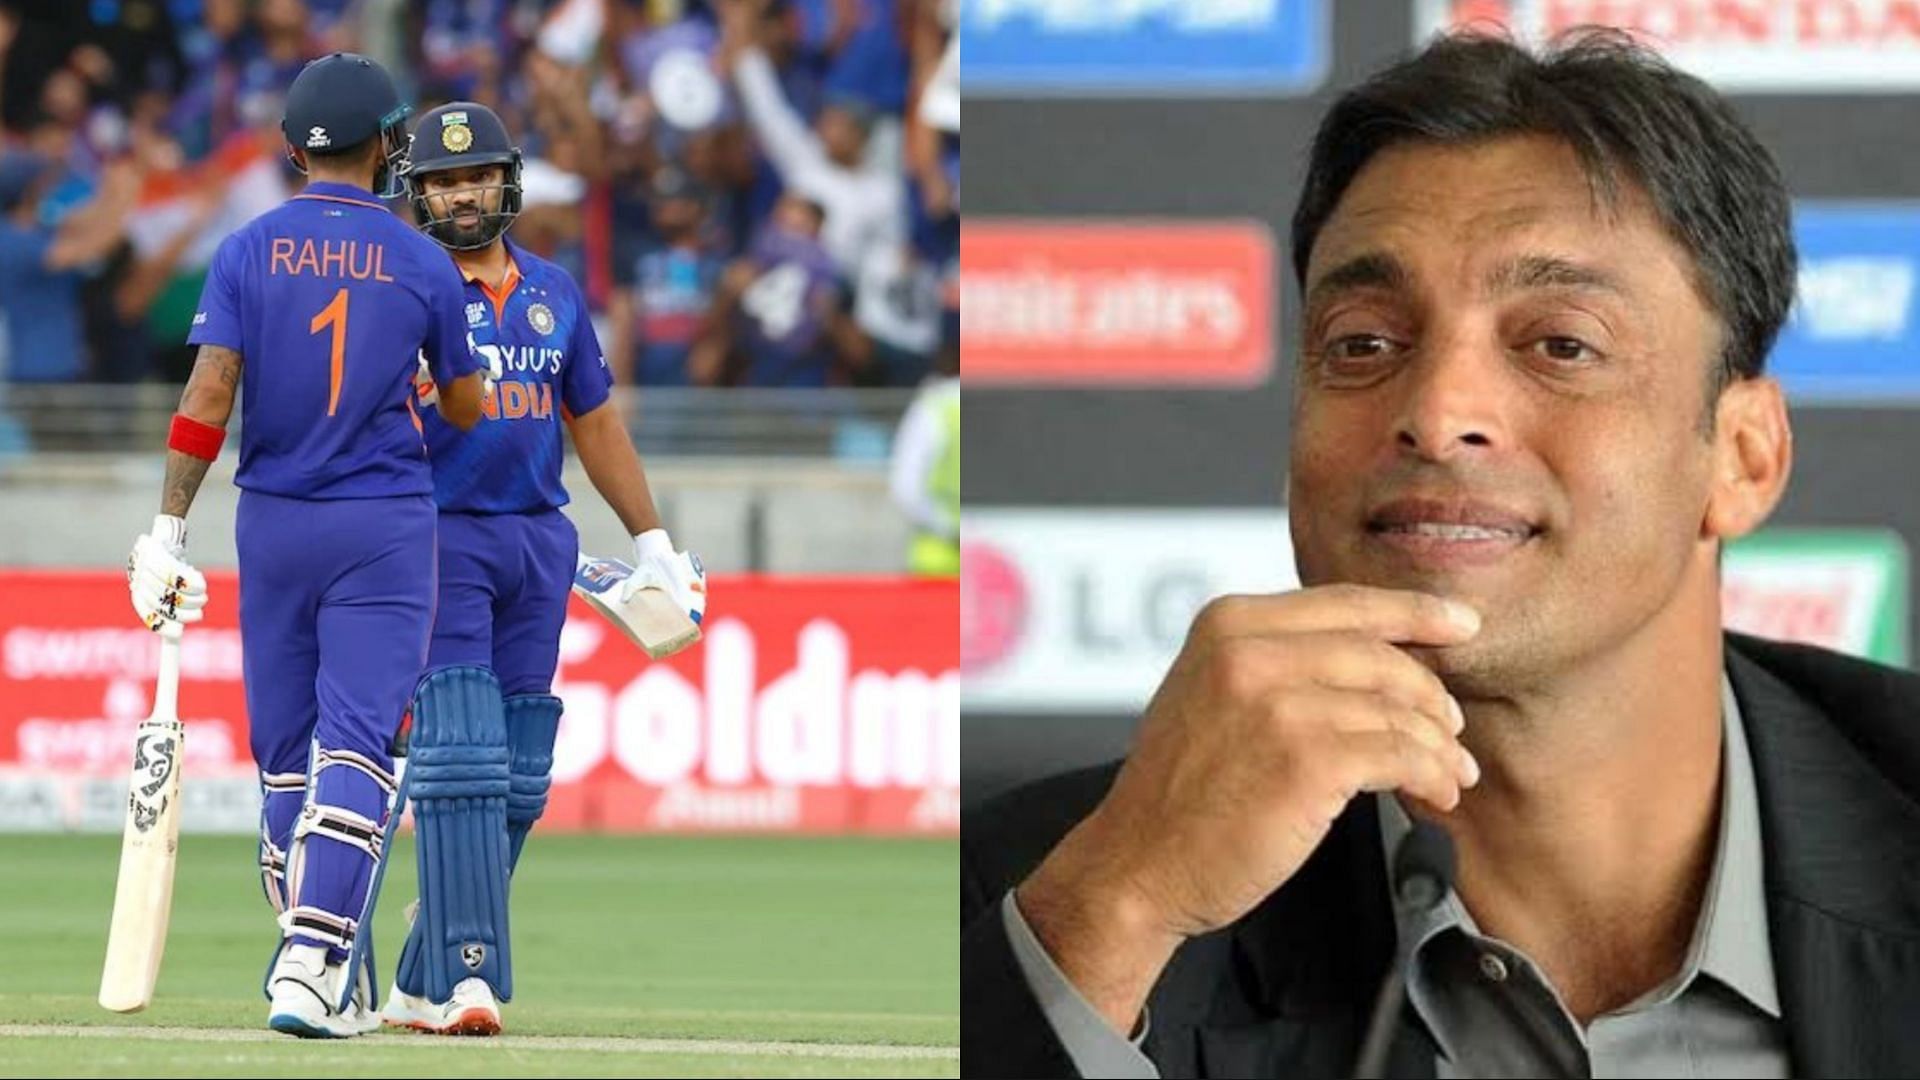 Shoaib Akhtar is not happy with the pitch on offer at the Dubai International Cricket Stadium 